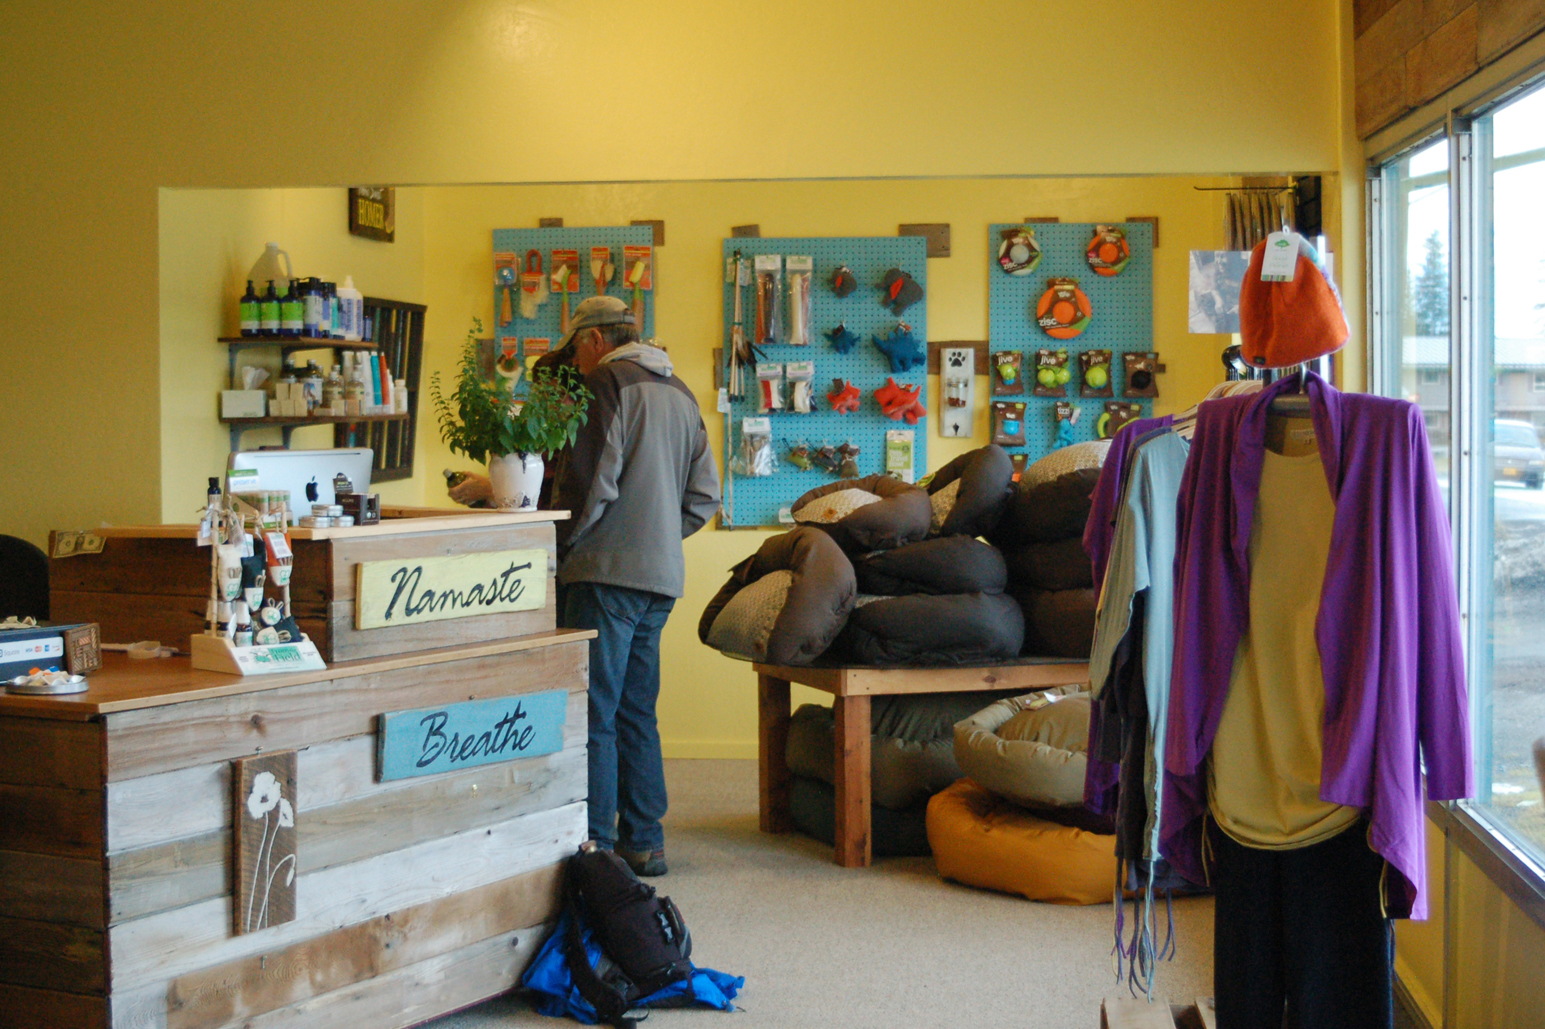 Shoppers browse at Sustainable Wares last Friday. Most of the furnishings are made from repurposed items like thrift store furniture or salvaged wood, such as the counter, which uses cedar from an old sauna.-Photo by Michael Armstrong, Homer News